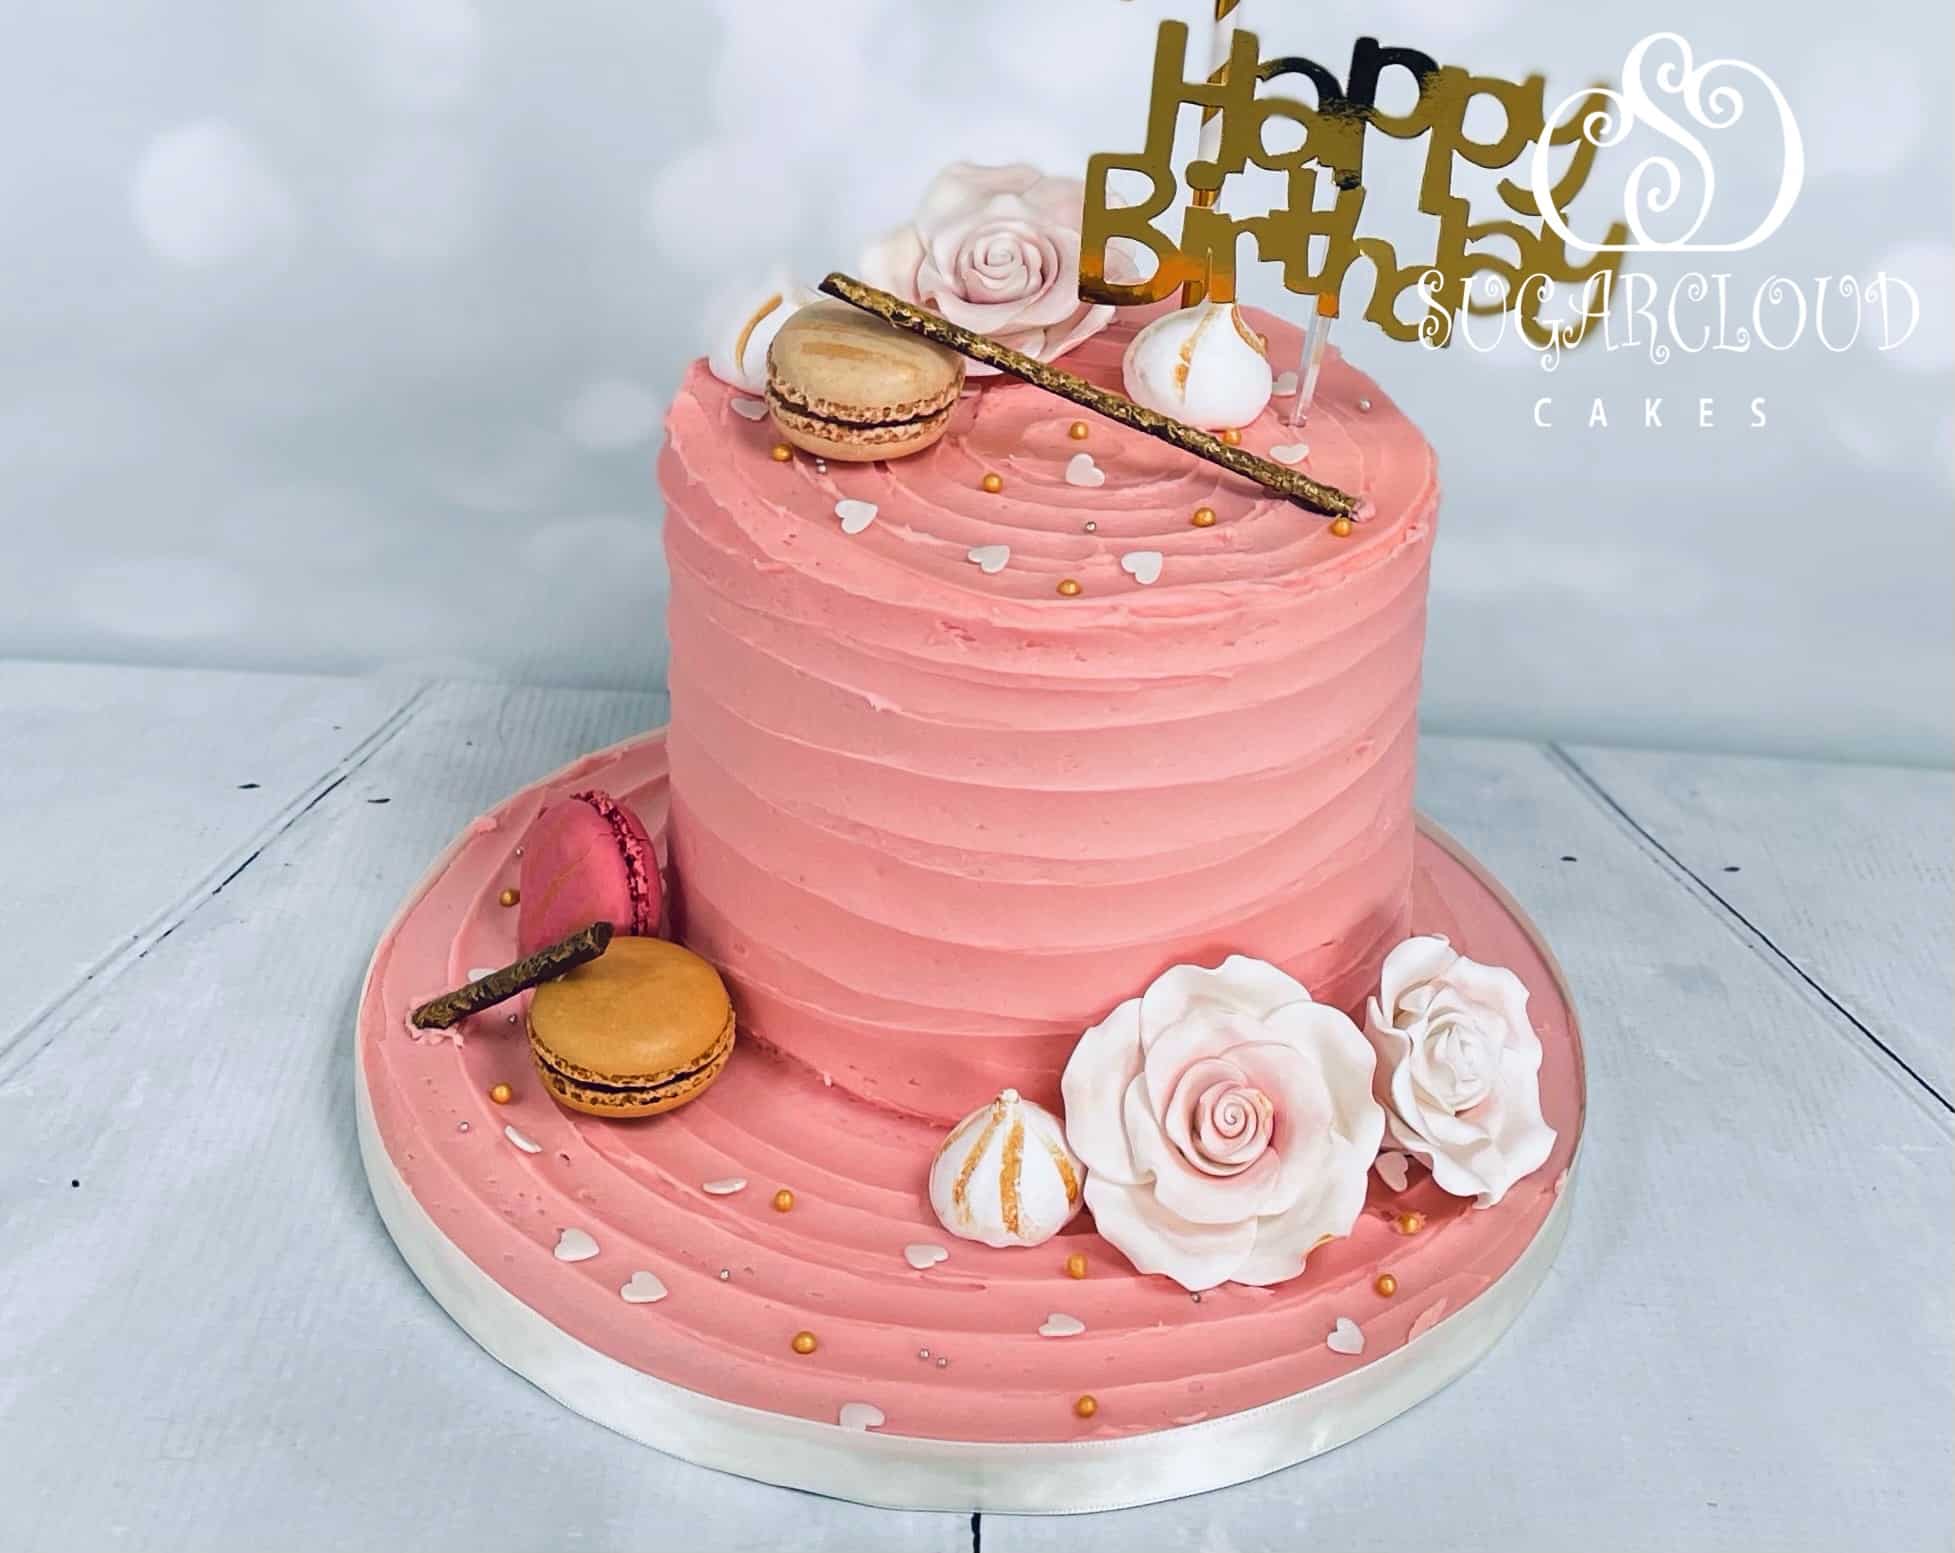 A Pink and Macaron Themed Birthday Cake, Whitchurch